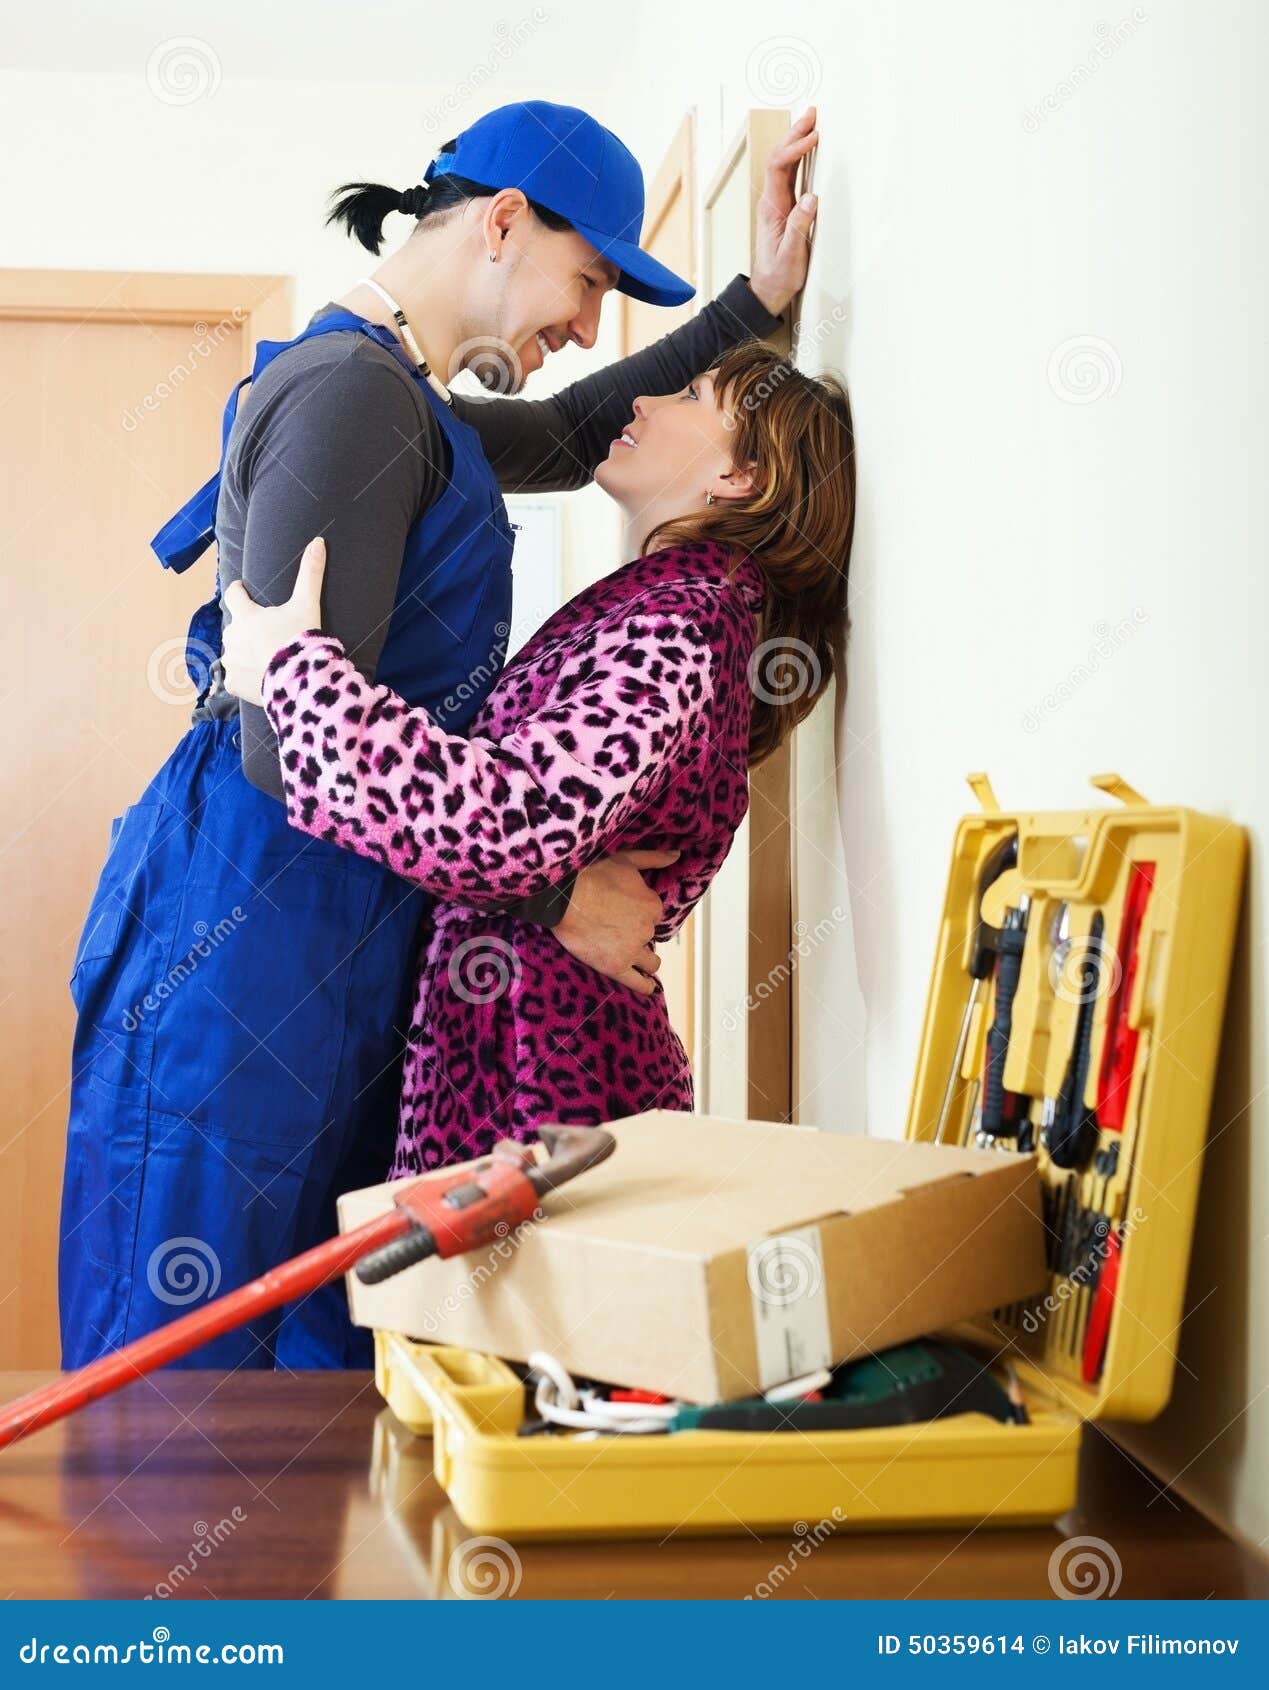 Plumber Having Flirt with Young Girl Stock Photo picture